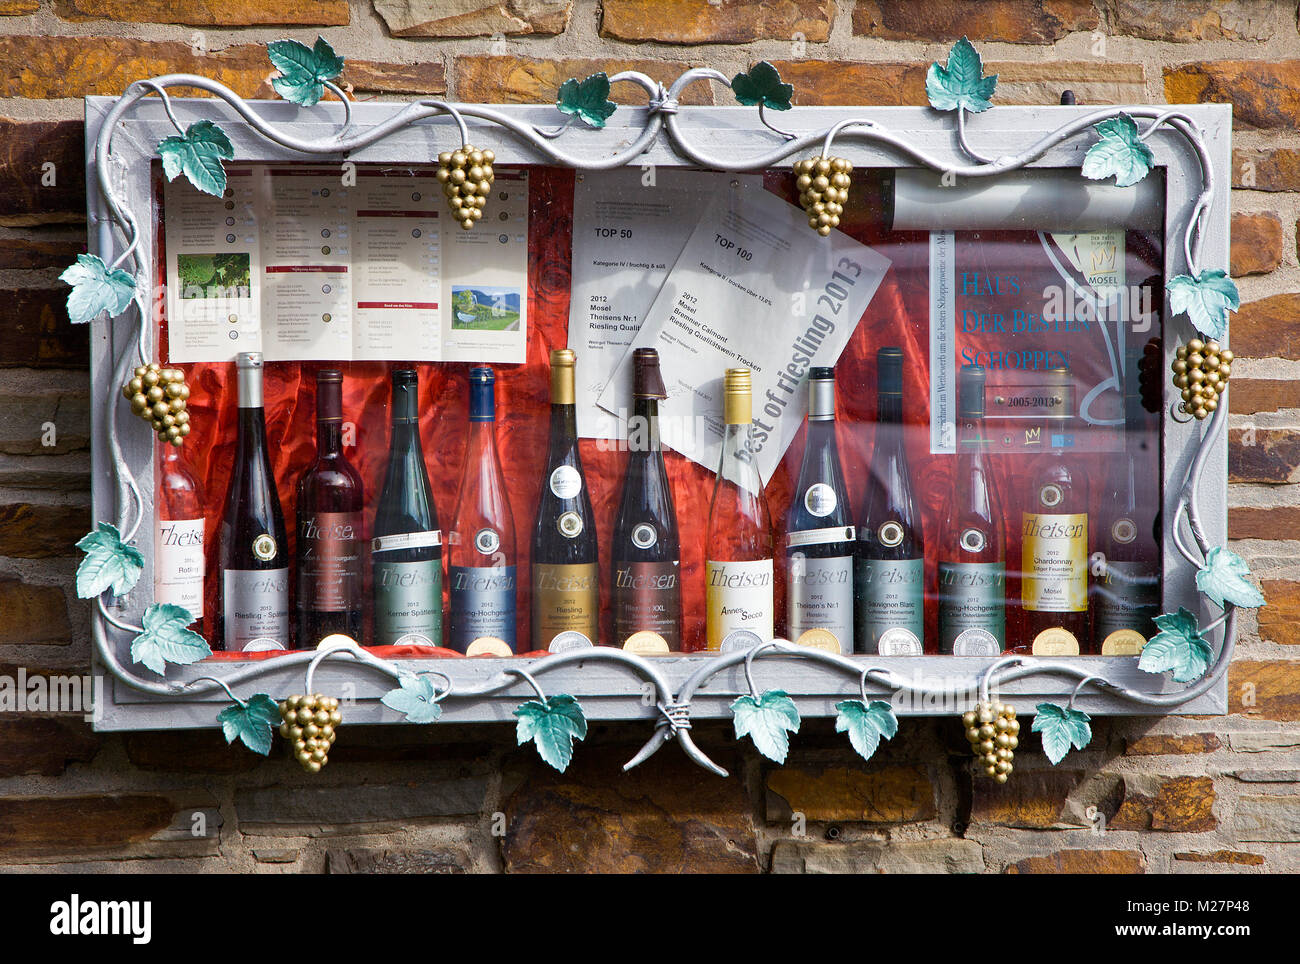 Wine sortiment at a house wall, wine village Ediger-Eller, Moselle river, Rhineland-Palatinate, Germany, Europe Stock Photo